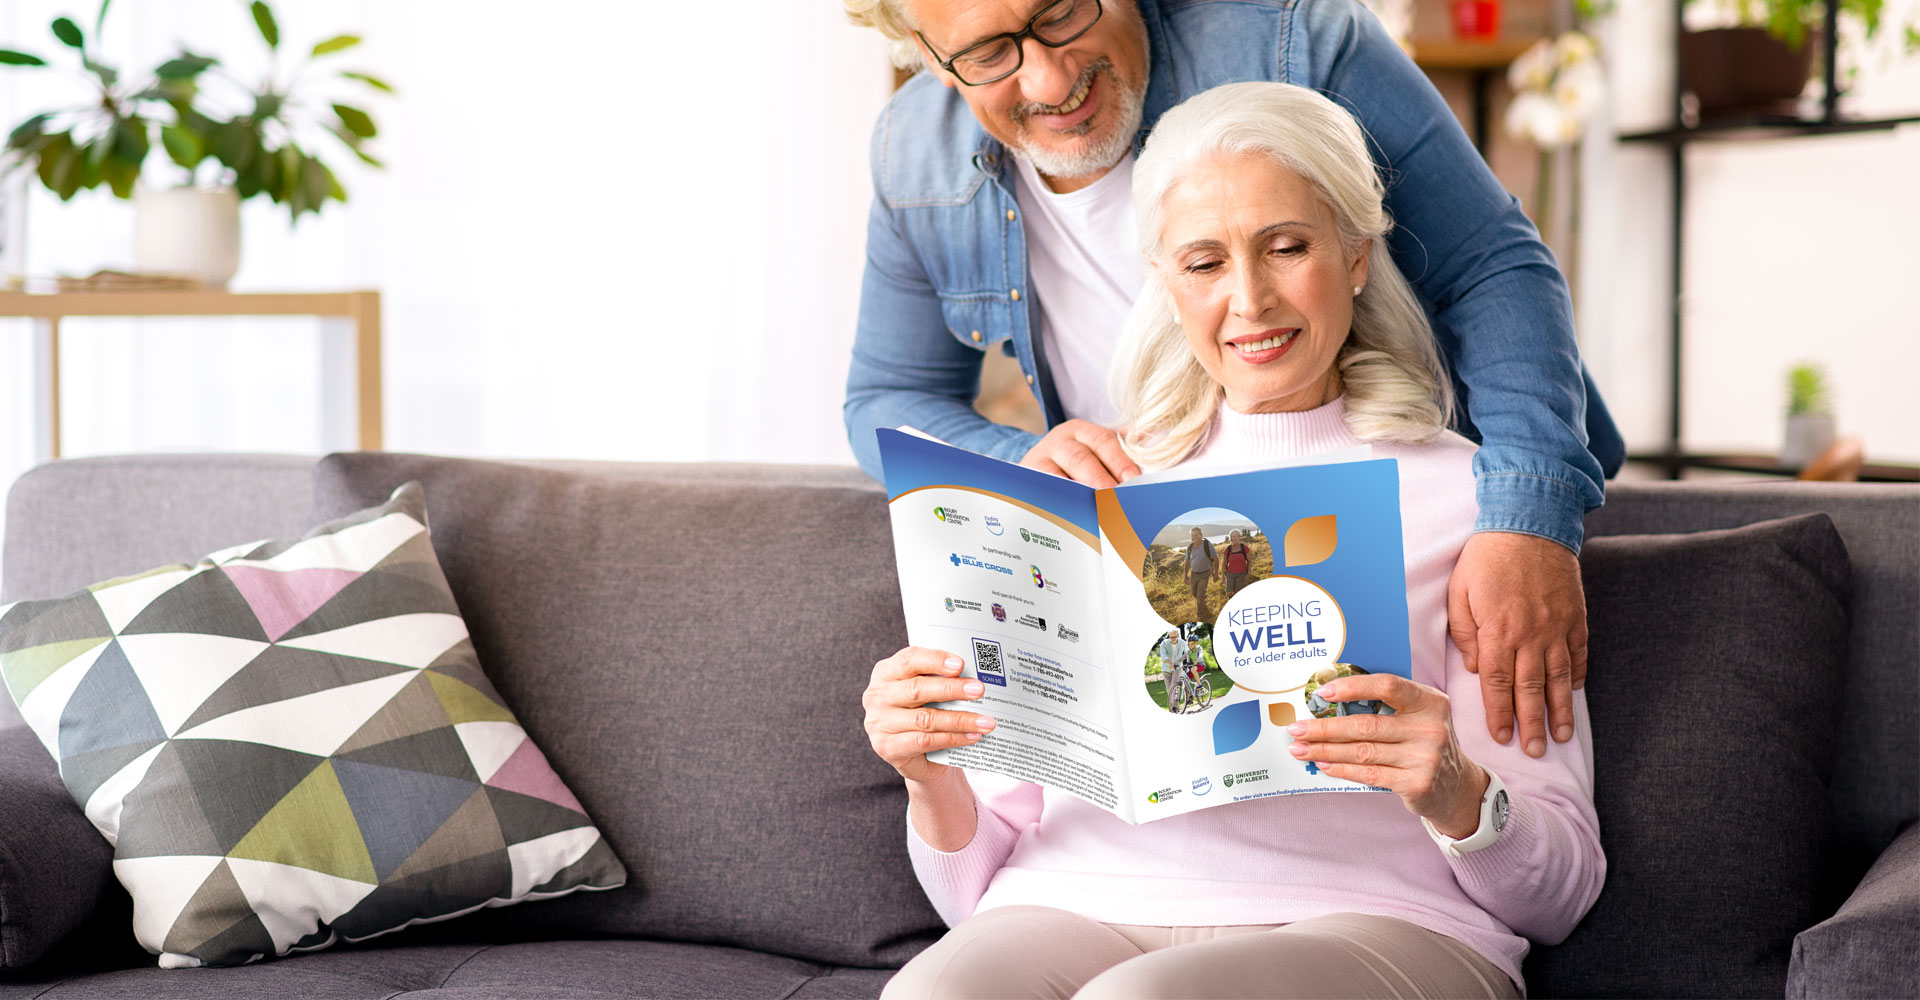 A older Albertan couple is reading Keeping Well together.